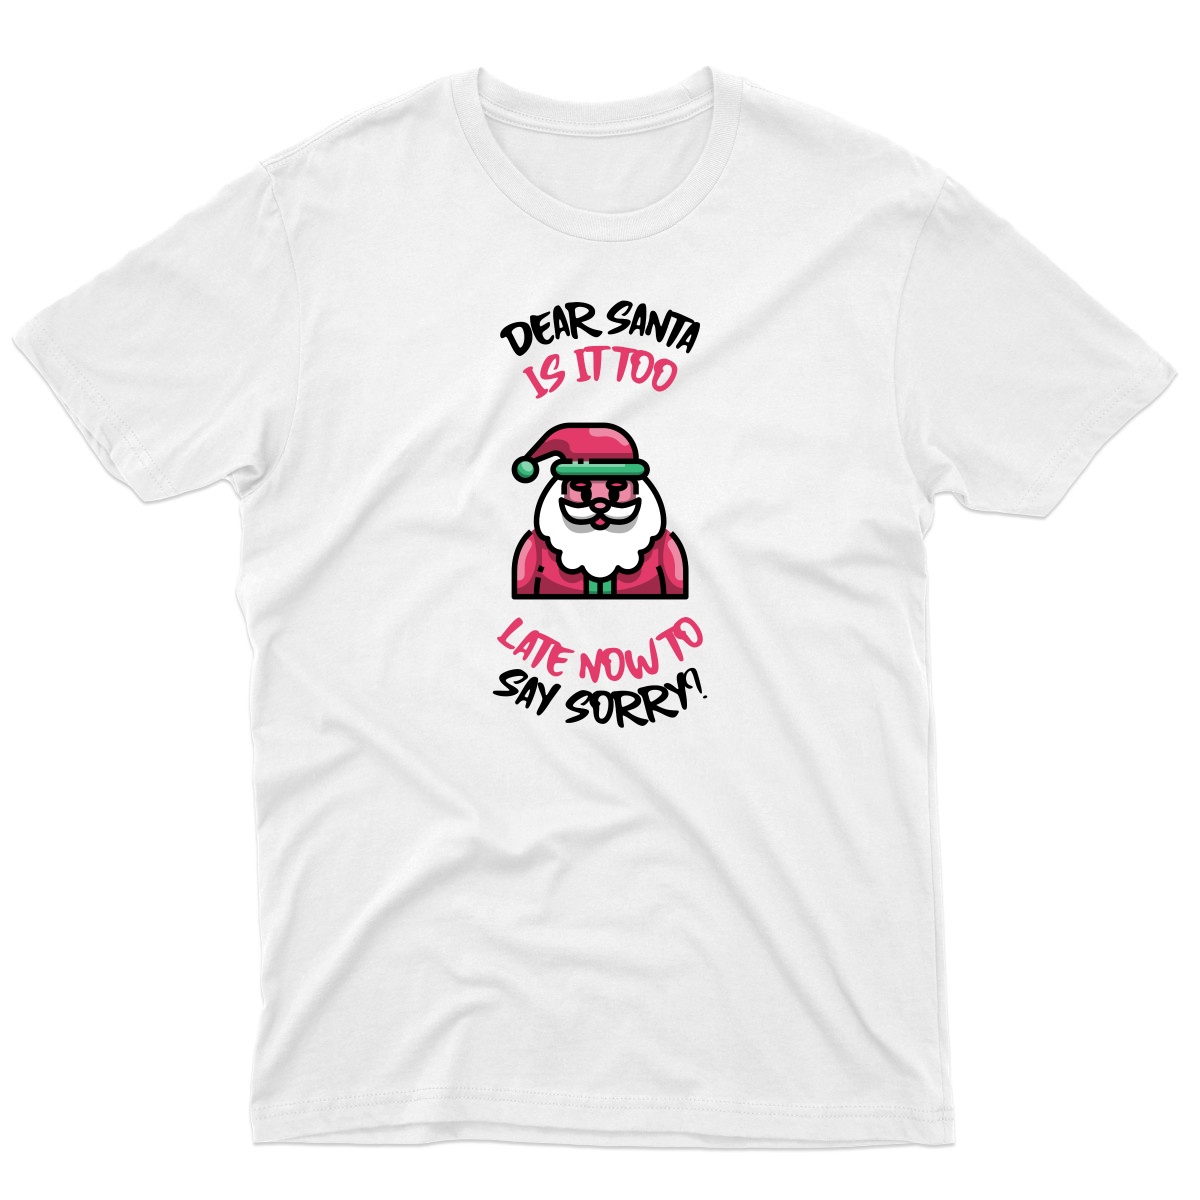 Dear Santa, Is It Too Late to Say Sorry? Men's T-shirt | White